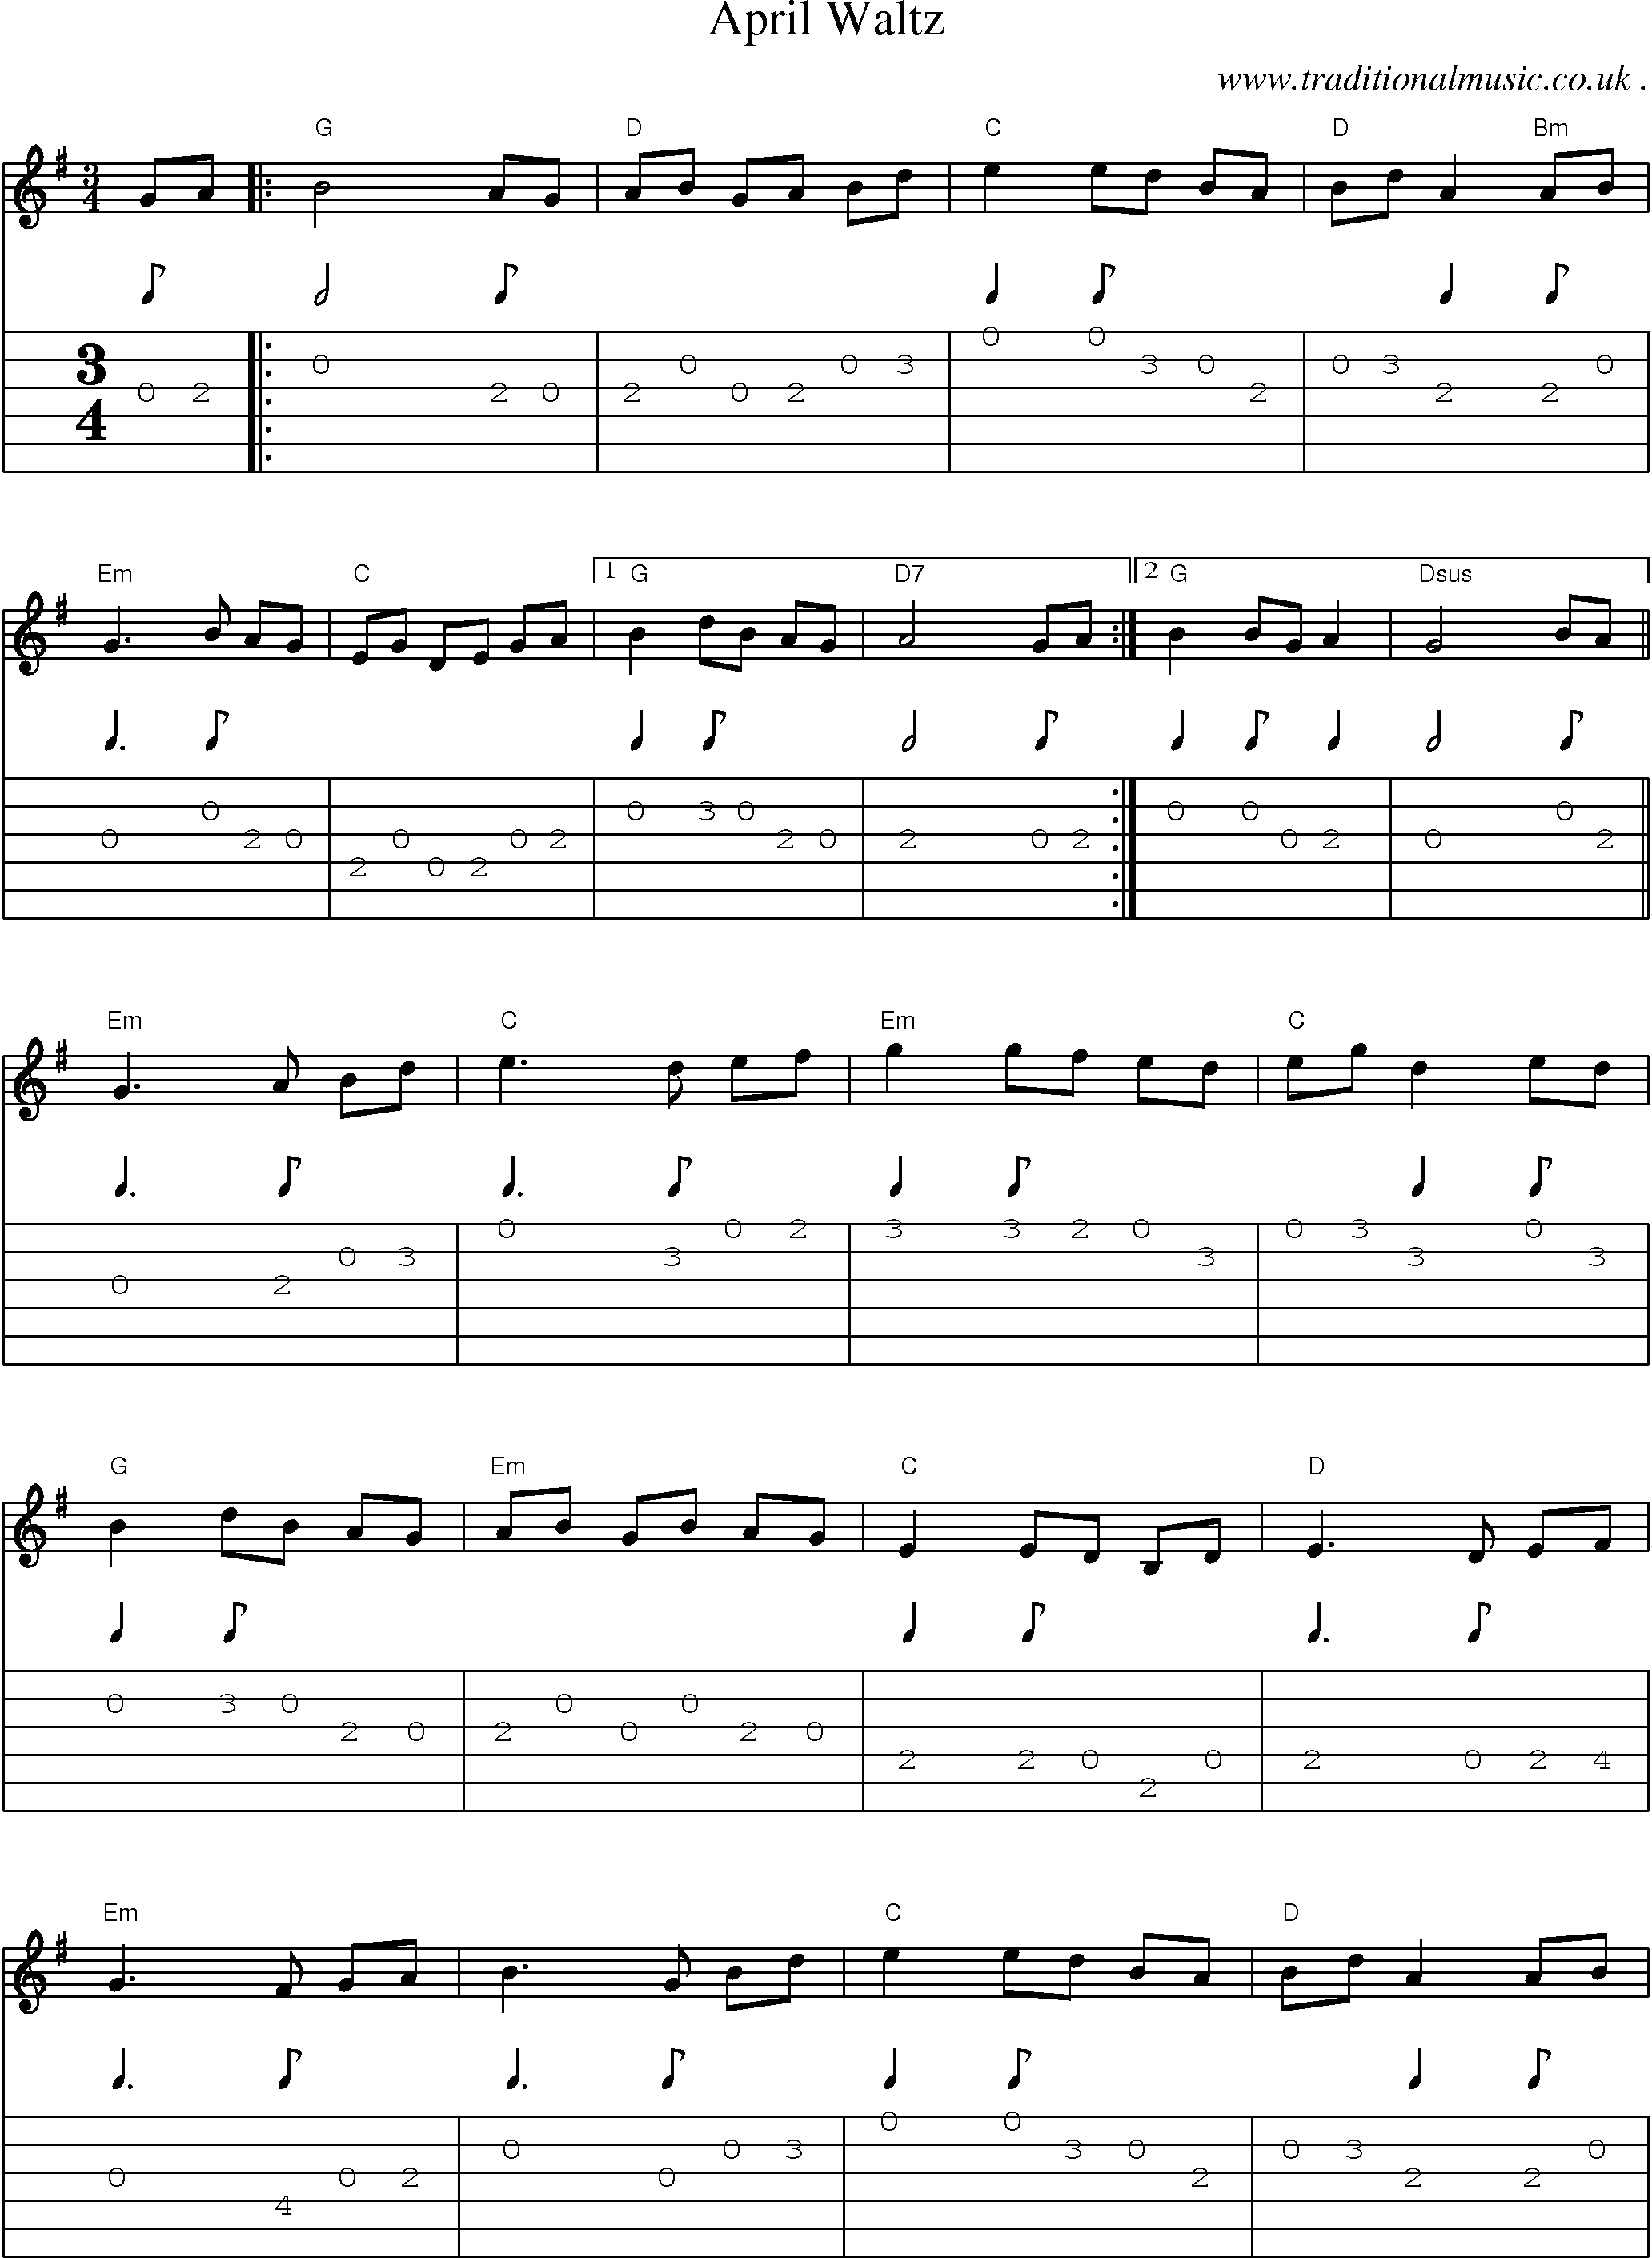 Music Score and Guitar Tabs for April Waltz